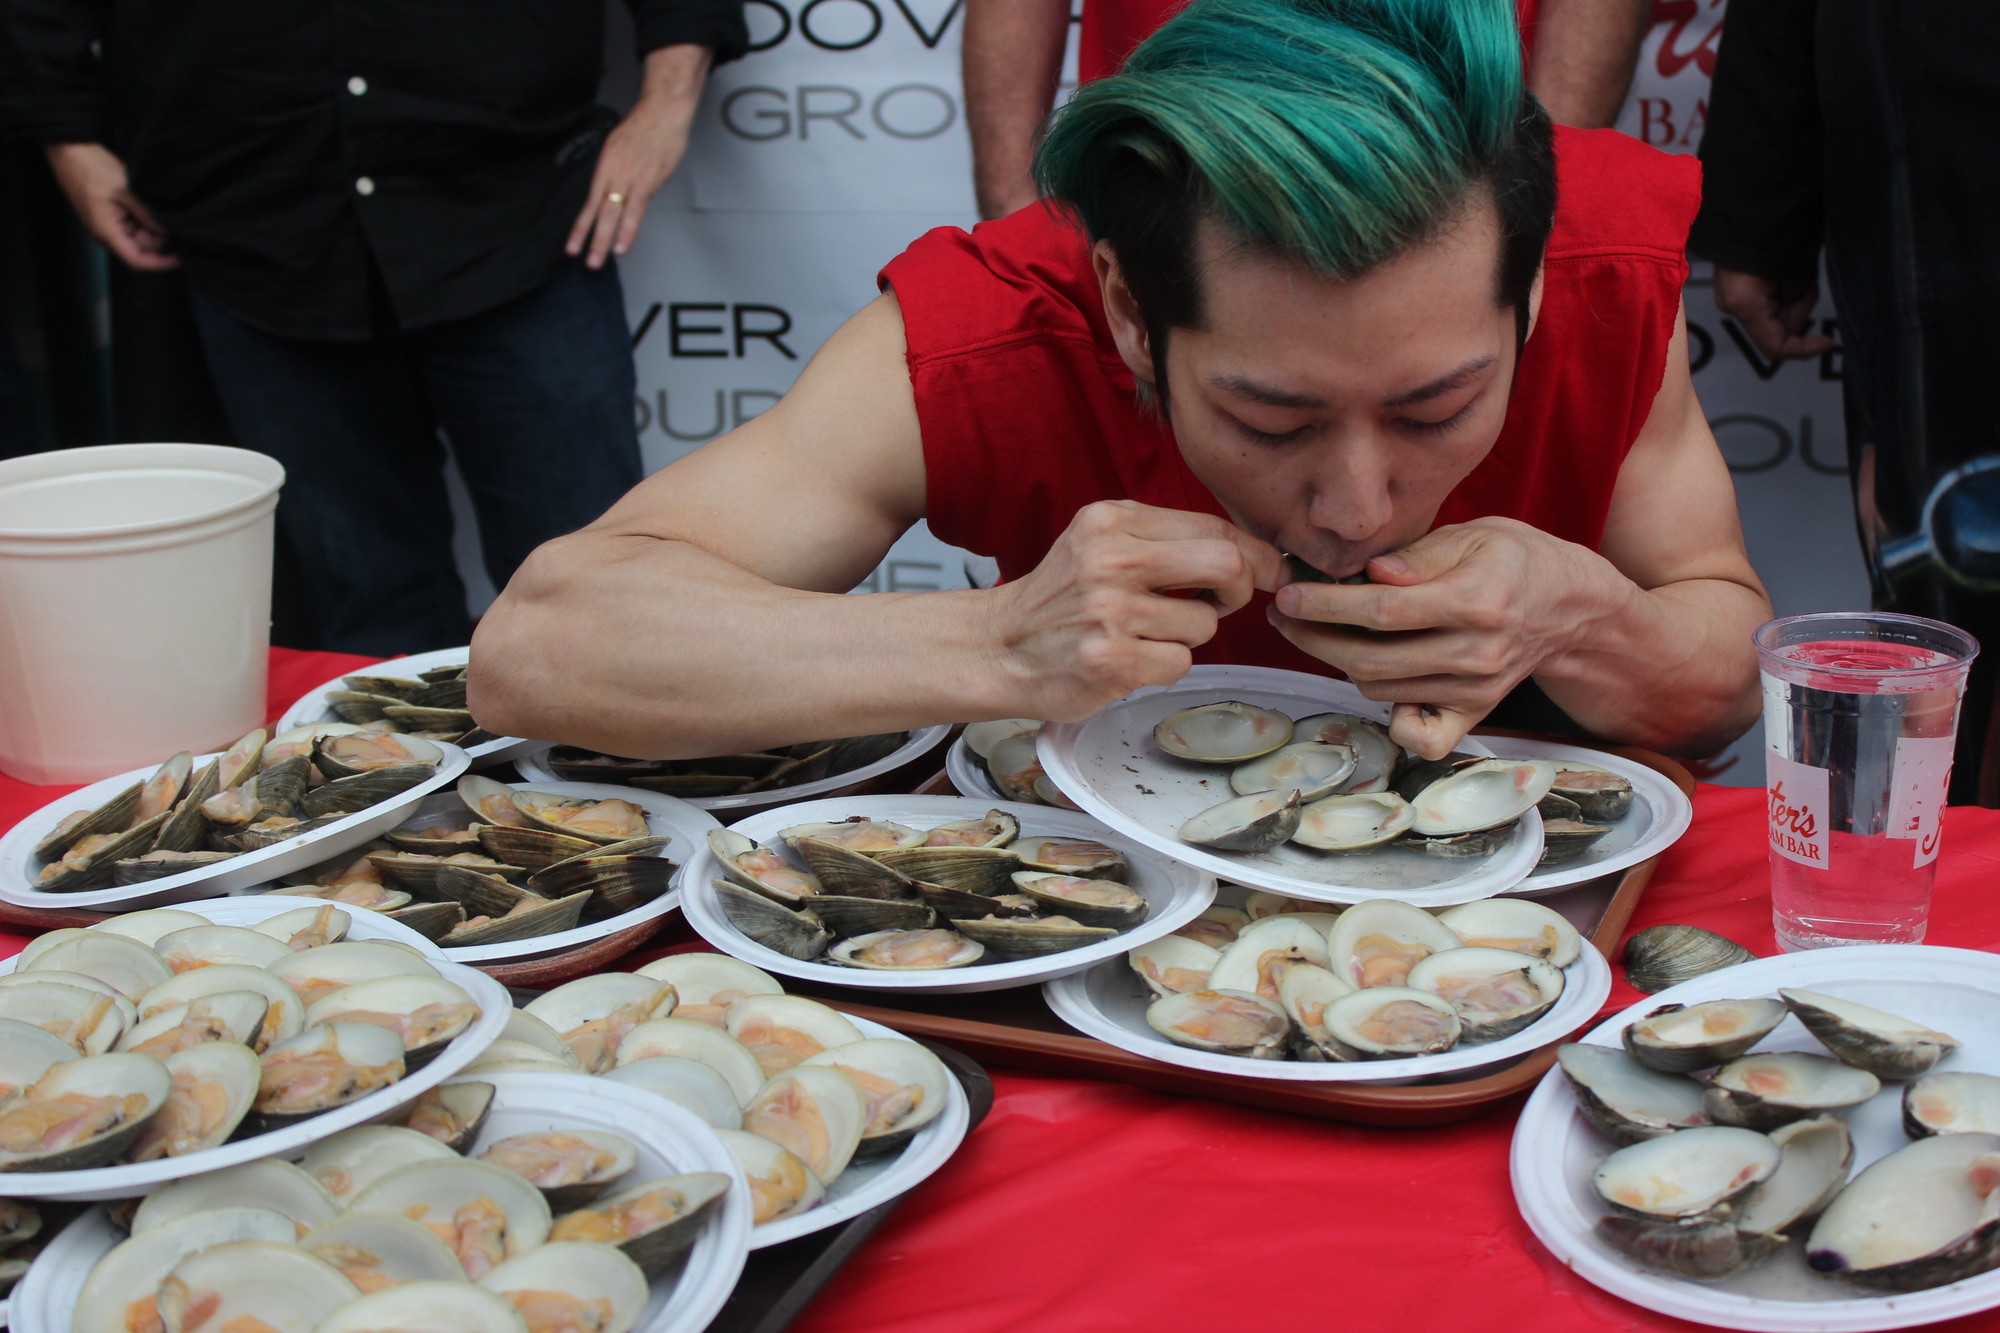 World Champion competitive eater Takeru Kobayashi ate 96 clams in two minutes to kick off Peter’s Clam Bar first Clam Eating Contest. Local fire departments participated to raise funds for Superstorm Sandy relief.